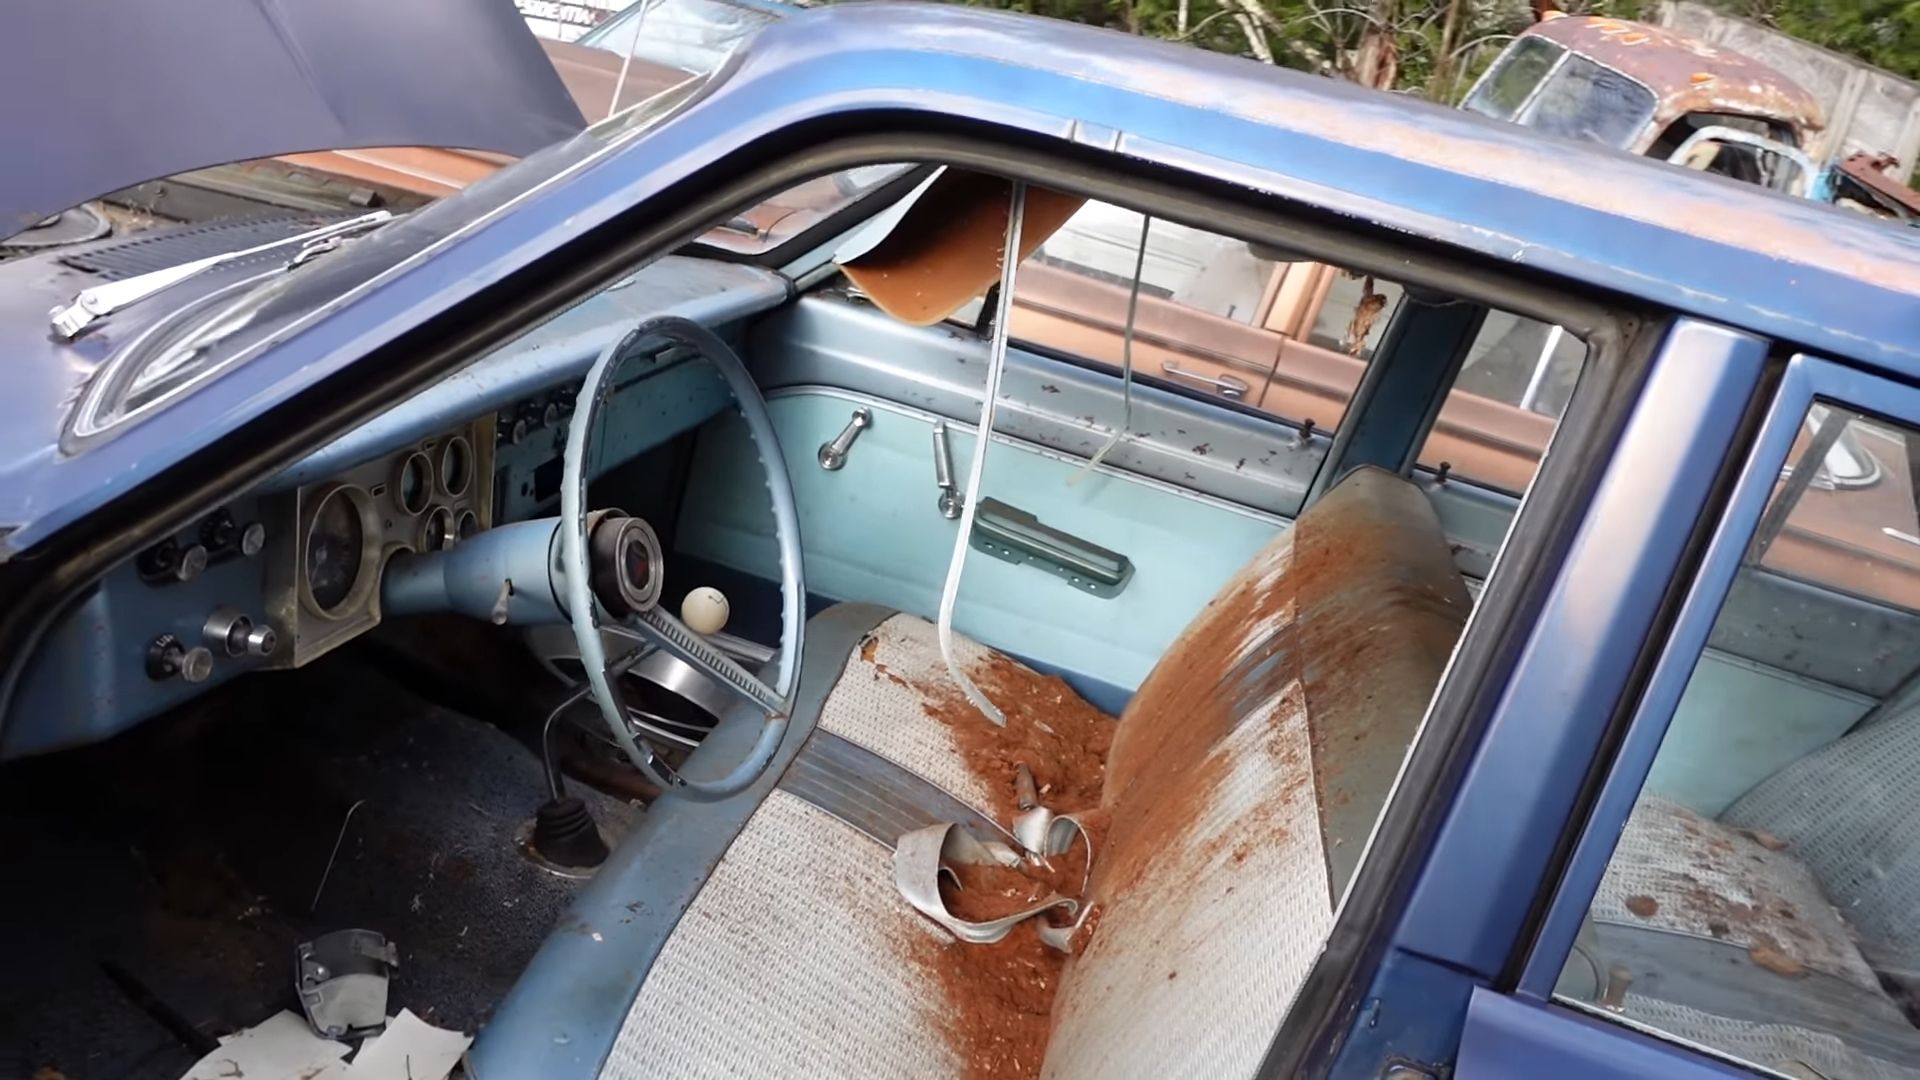 Plymouth Valiant In Field Interior View